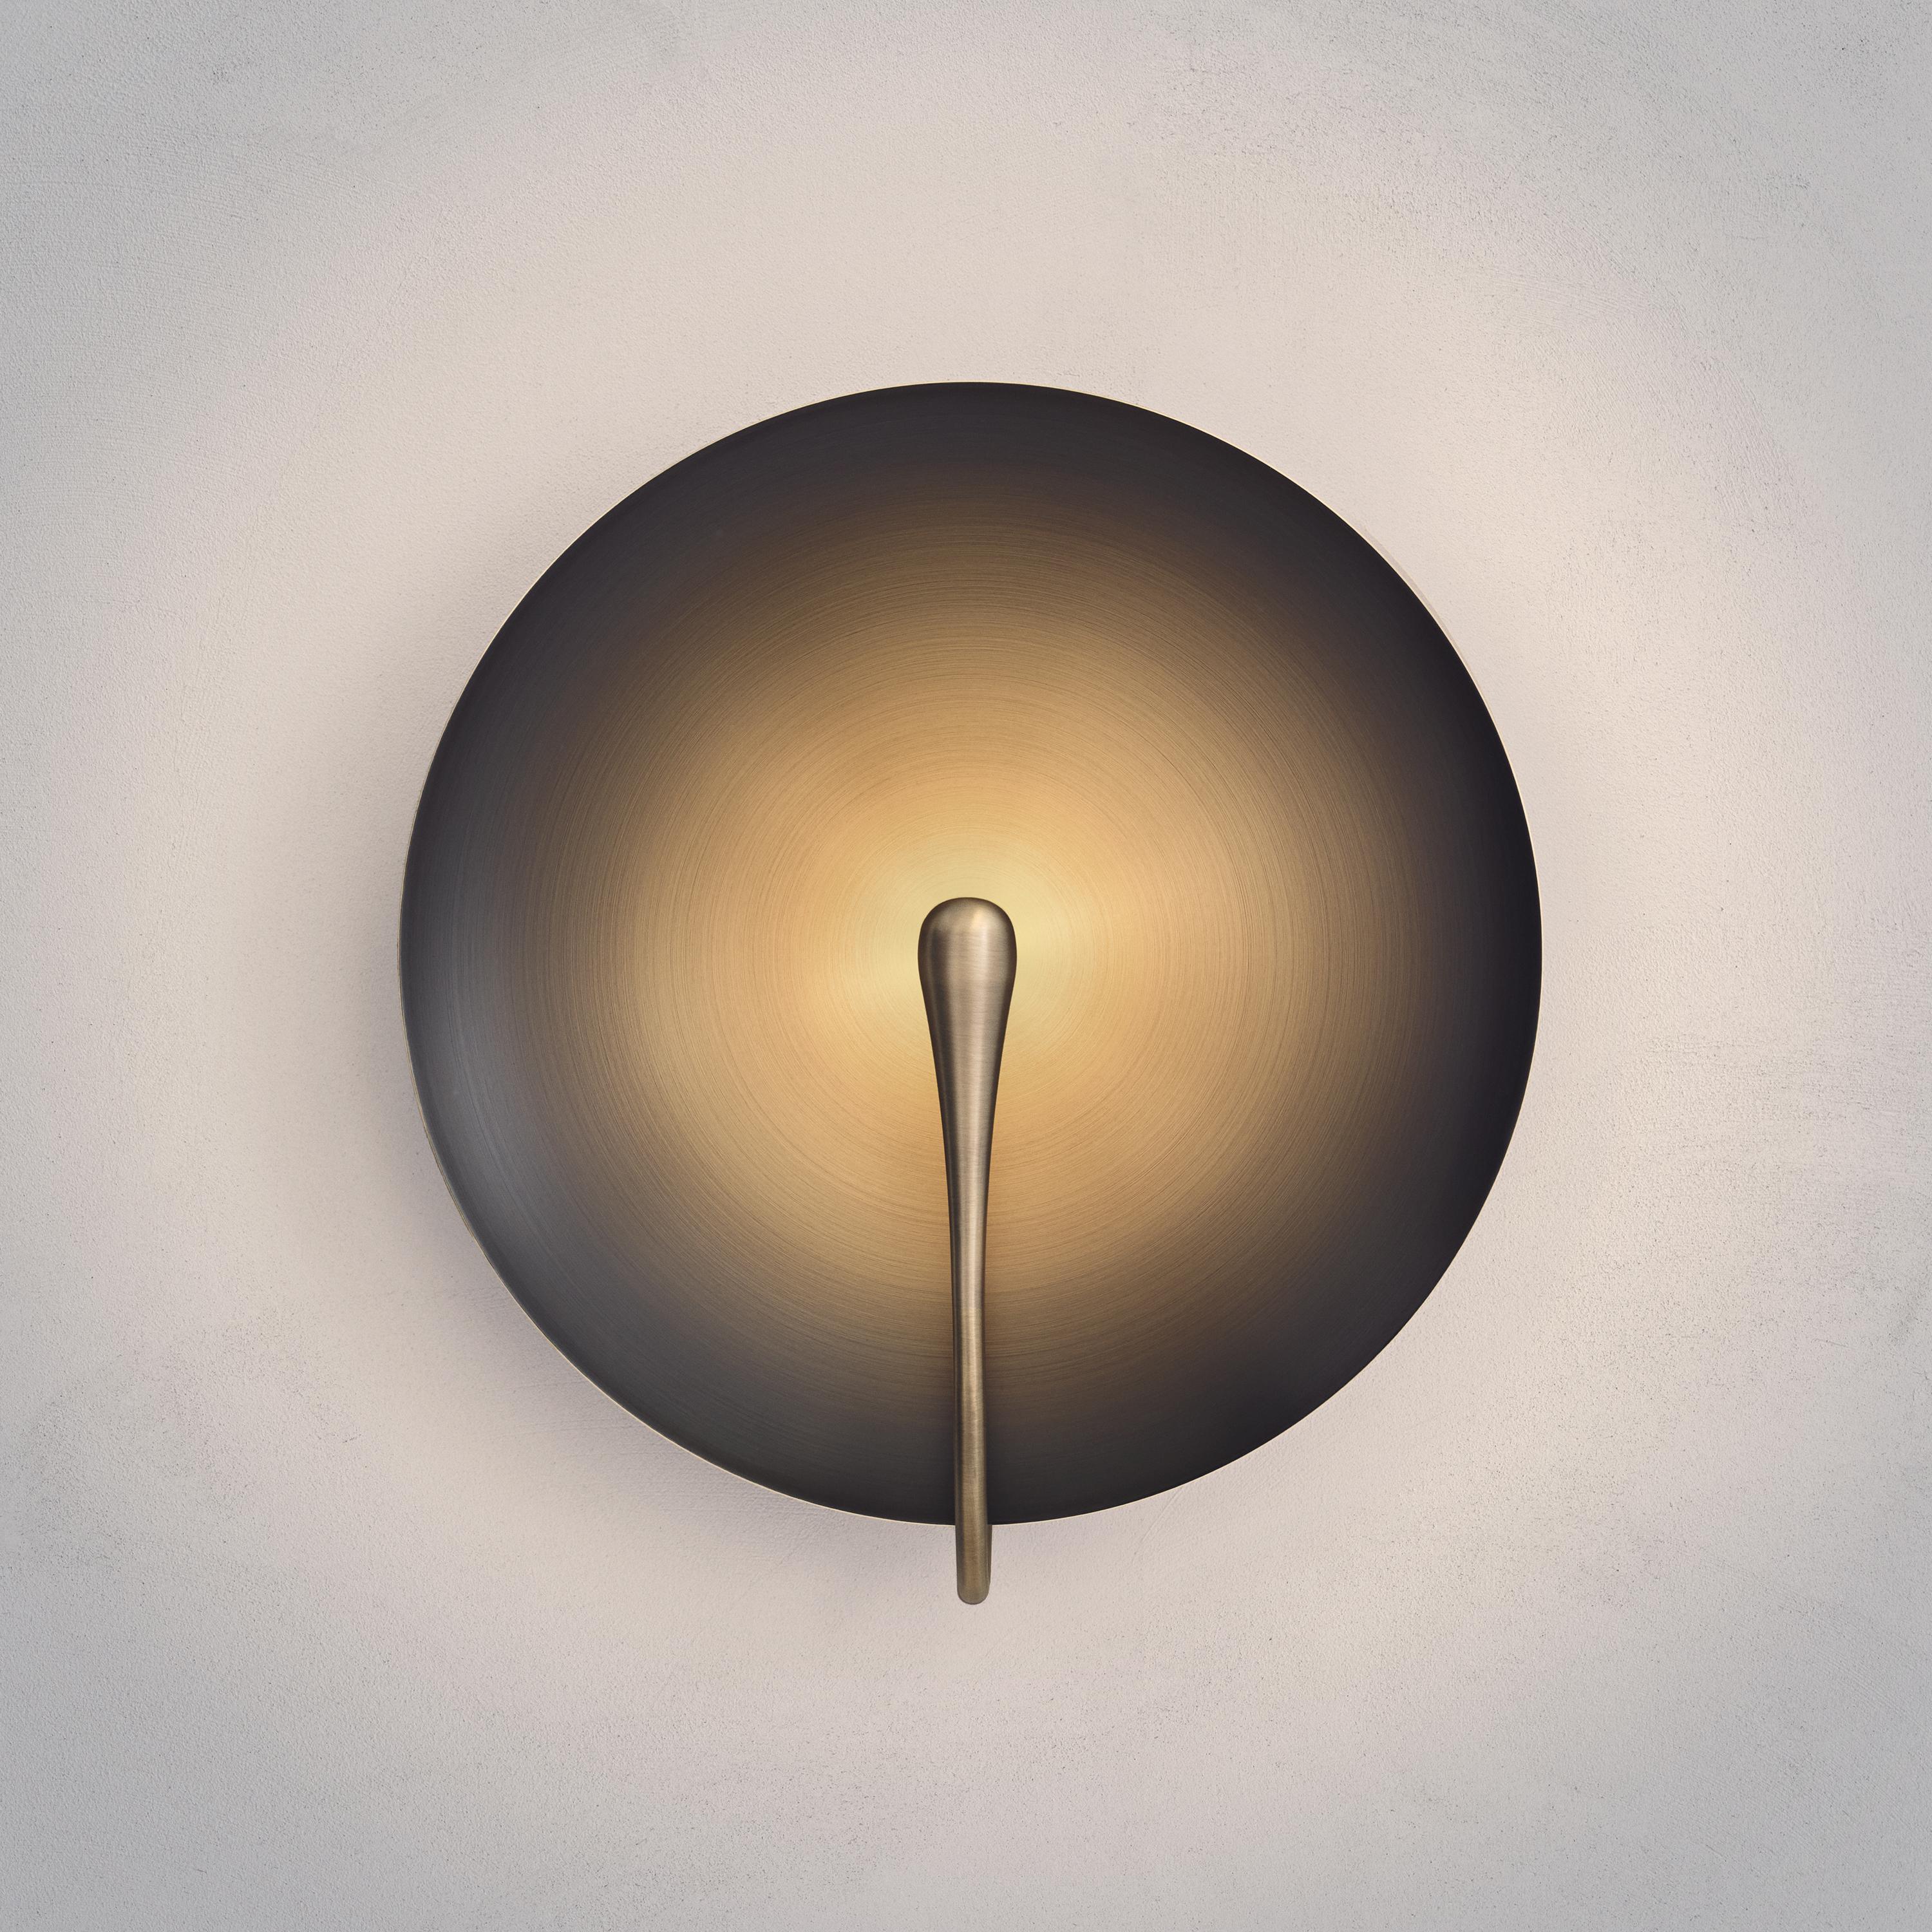 A gentle silhouette of a plate makes up this unique wall light. To create this orbital, gradient-finished shade, a mixed patina is applied on a hand-spun brass plate, from dark bronze to bright brushed brass, to accentuate the light effect. Please